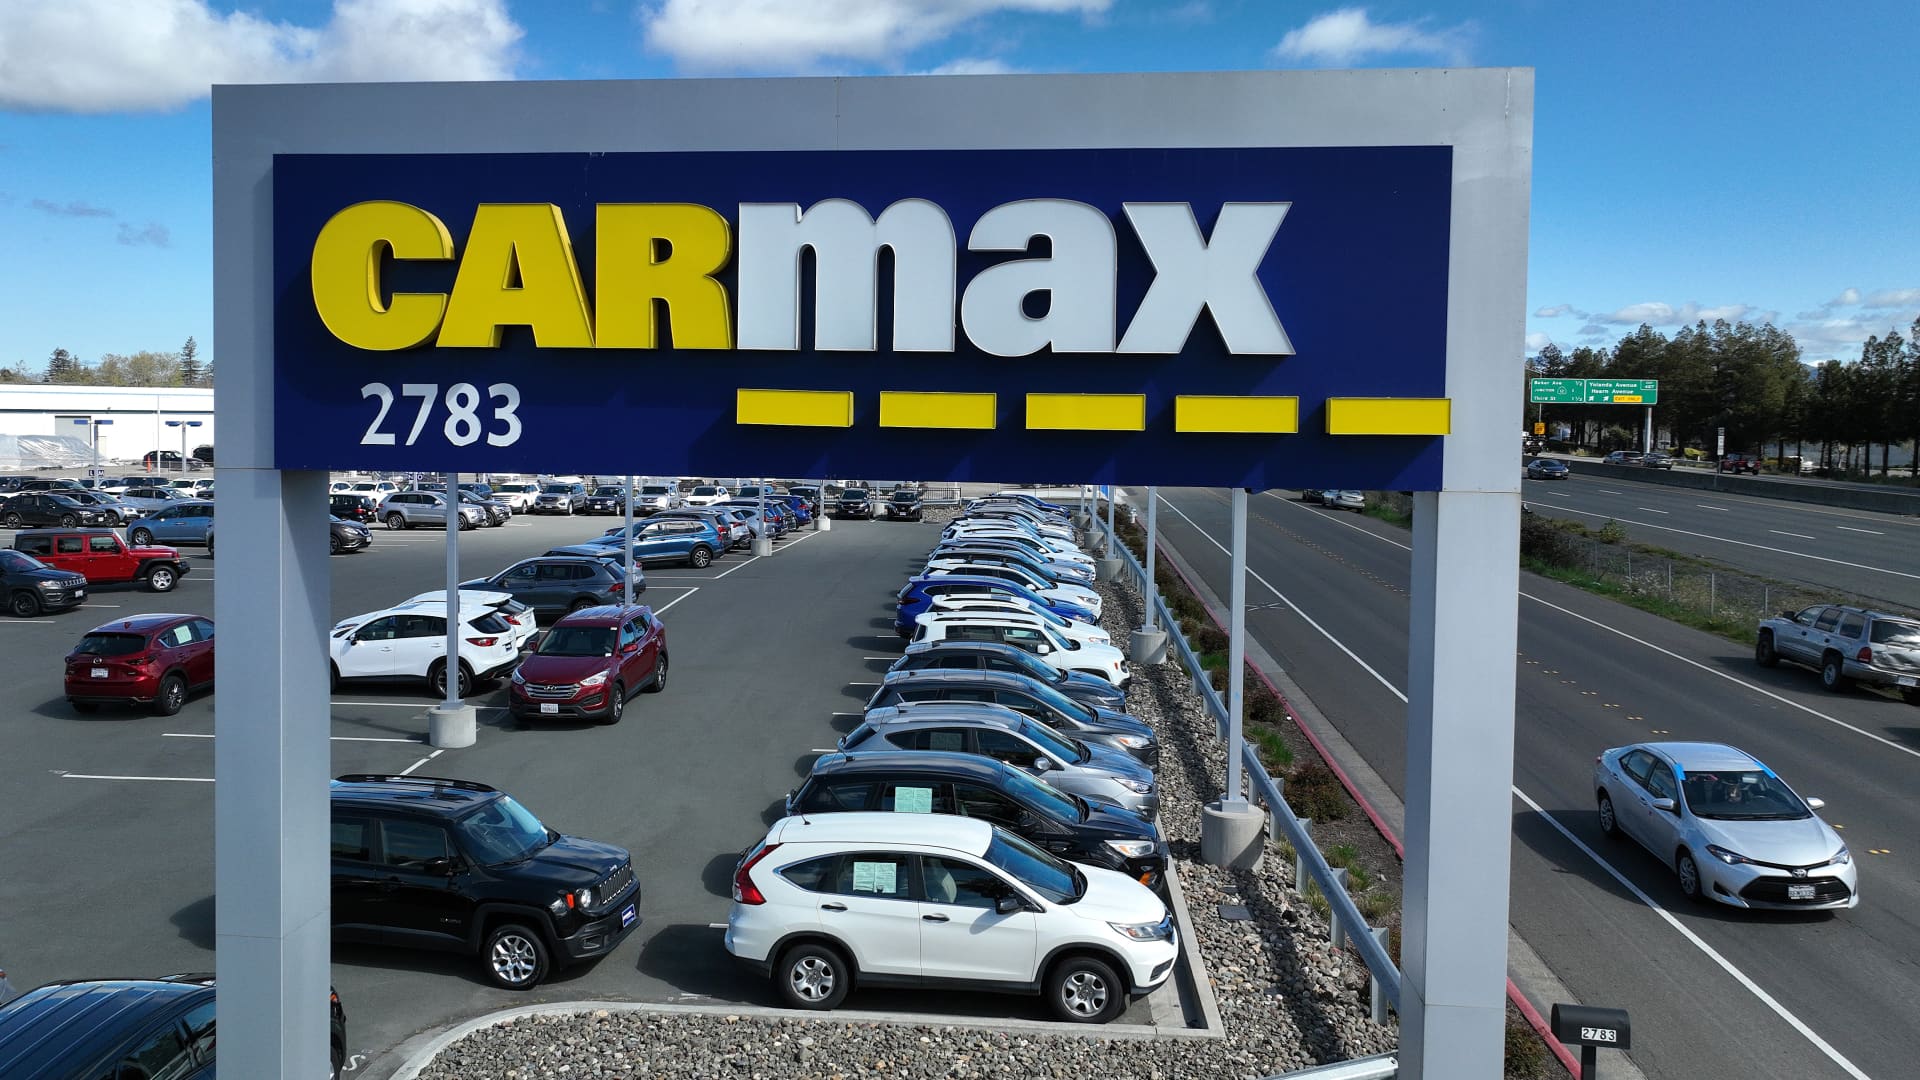 Stocks making the biggest moves midday: CarMax, Nike, Paramount, Fastenal and more